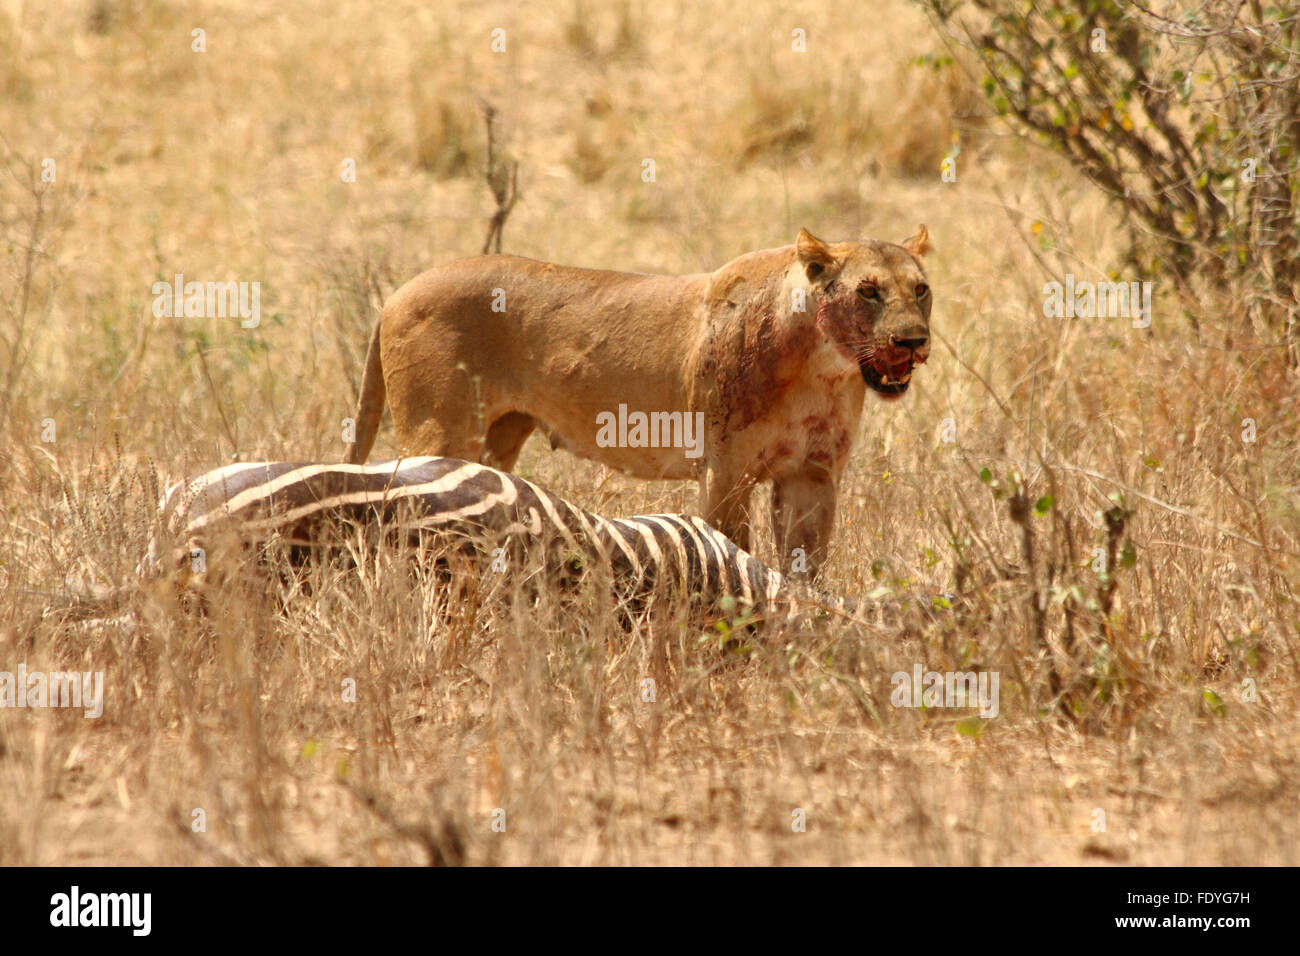 A bloody lioness (Panthera leo) stands panting over her fresh kill of a zebra. Stock Photo